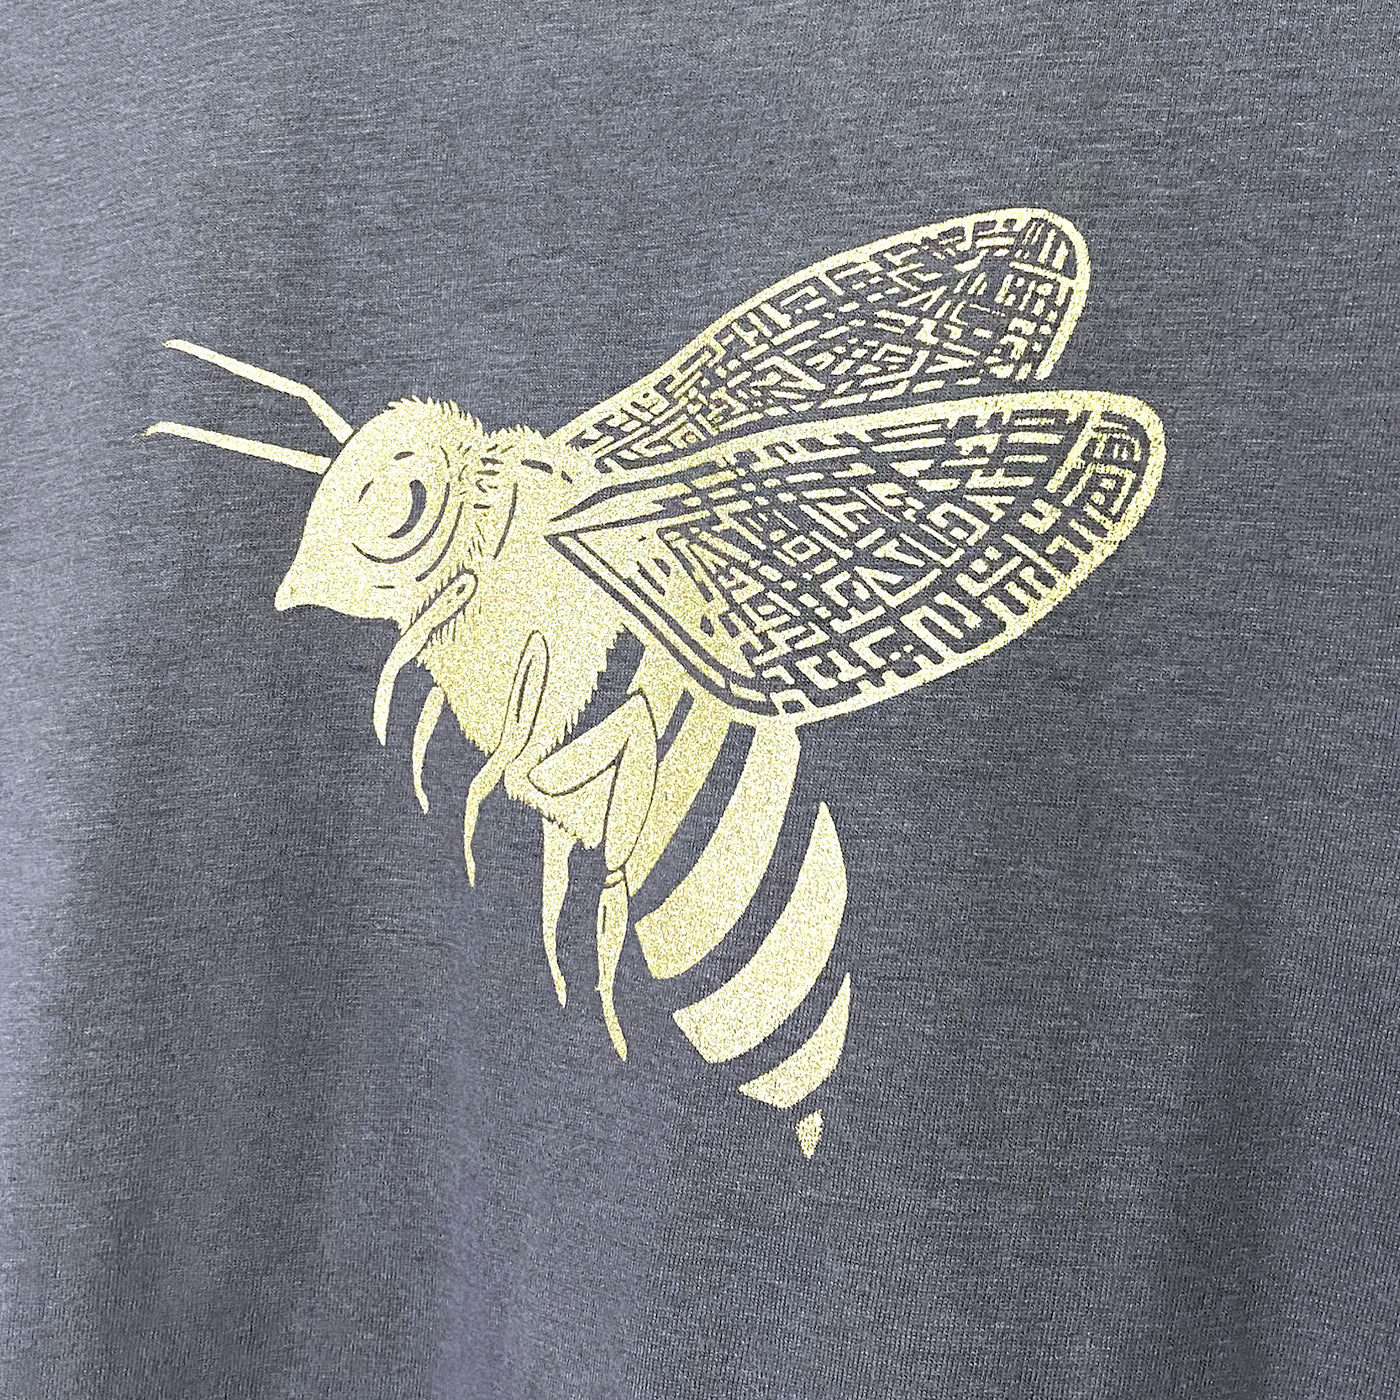 Gold Bee on Charcoal Grey T-shirt